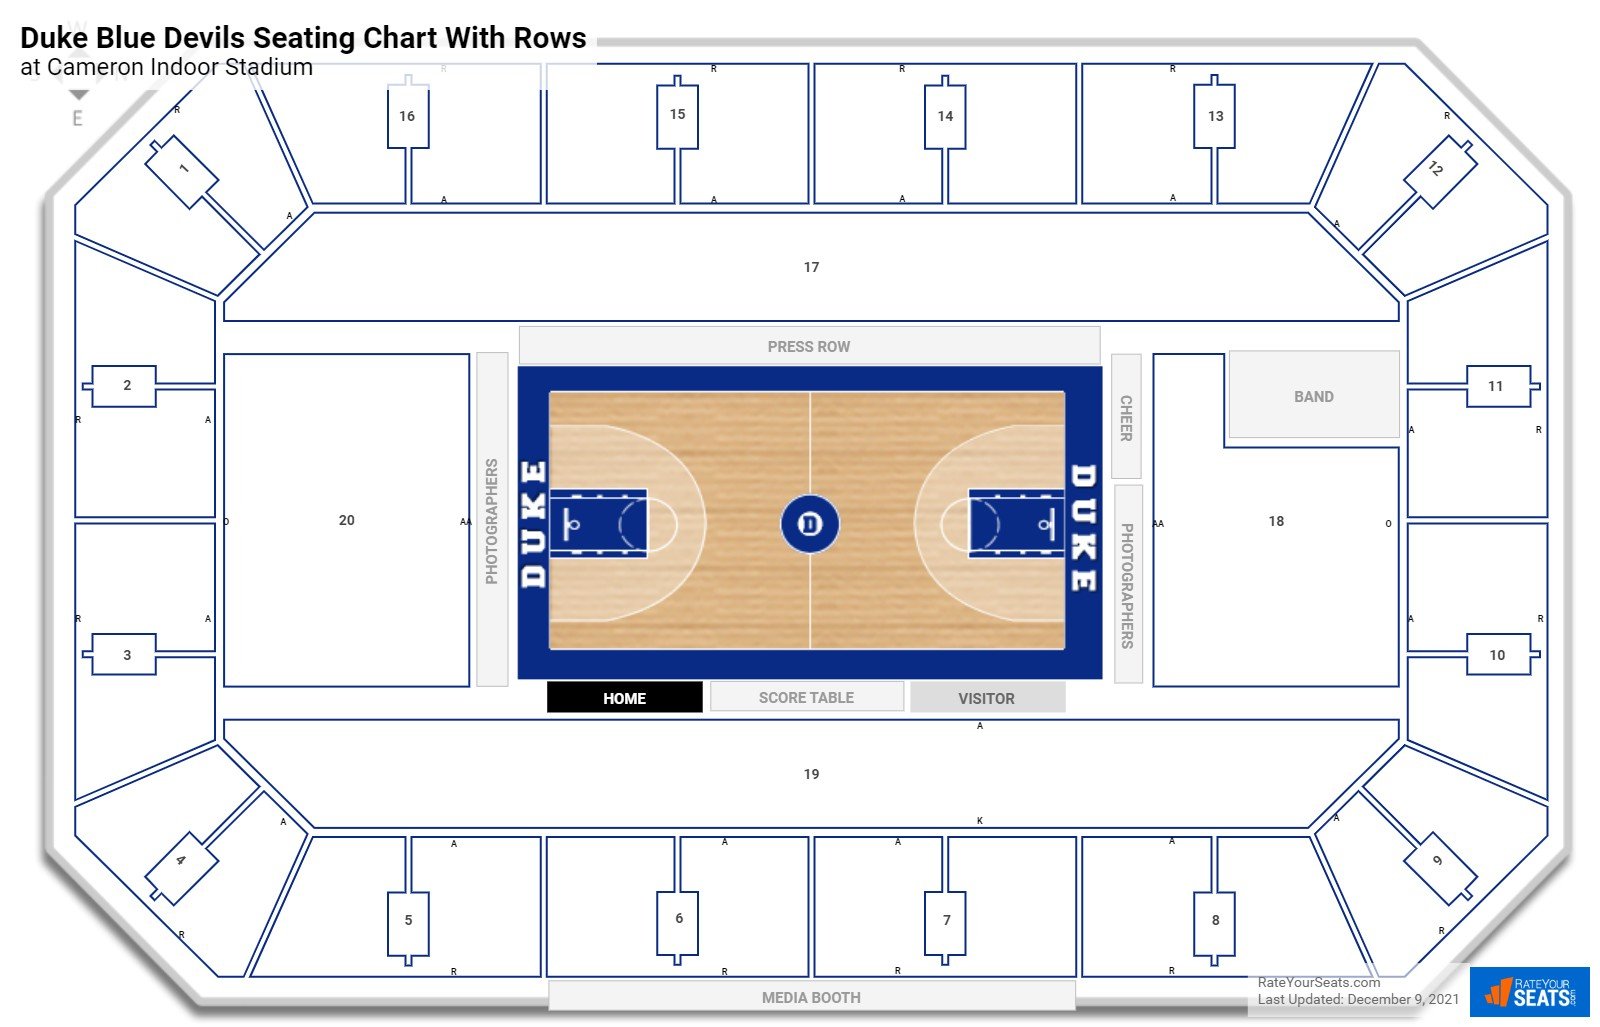 Cameron Indoor Stadium seating chart with row numbers